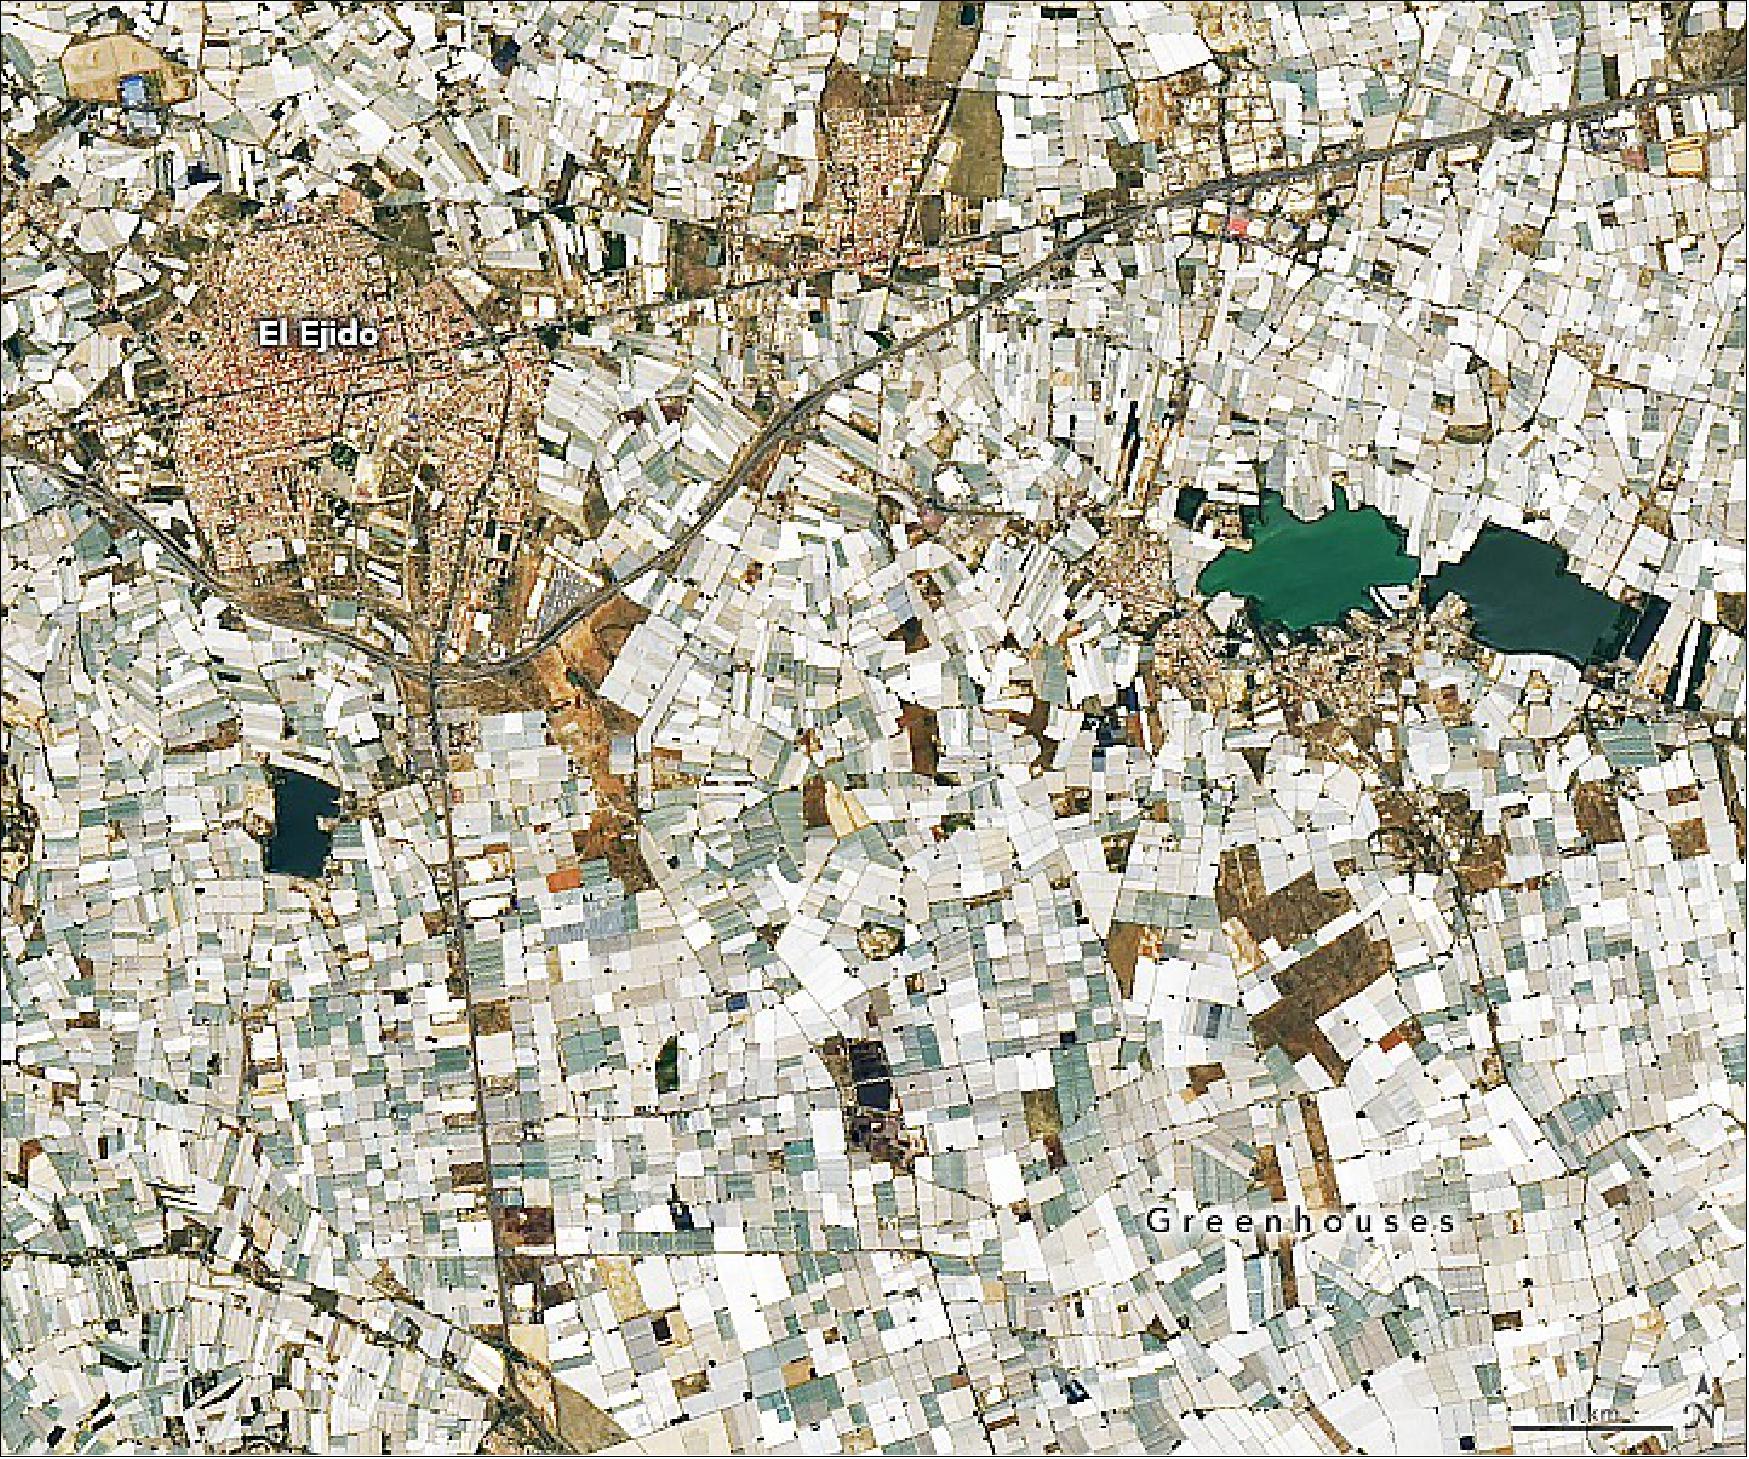 Figure 17: On 24 May 2022, OLI-2 on Landsat-9 captured these natural-color images of a sea of plastic greenhouses around the town of El Ejido. The town sits on a small coastal plain called Campo de Dalías, which has one of the highest concentrations of greenhouses in the world (image credit: NASA Earth Observatory images by Lauren Dauphin, using Landsat data from the U.S. Geological Survey. Story by Adam Voiland)